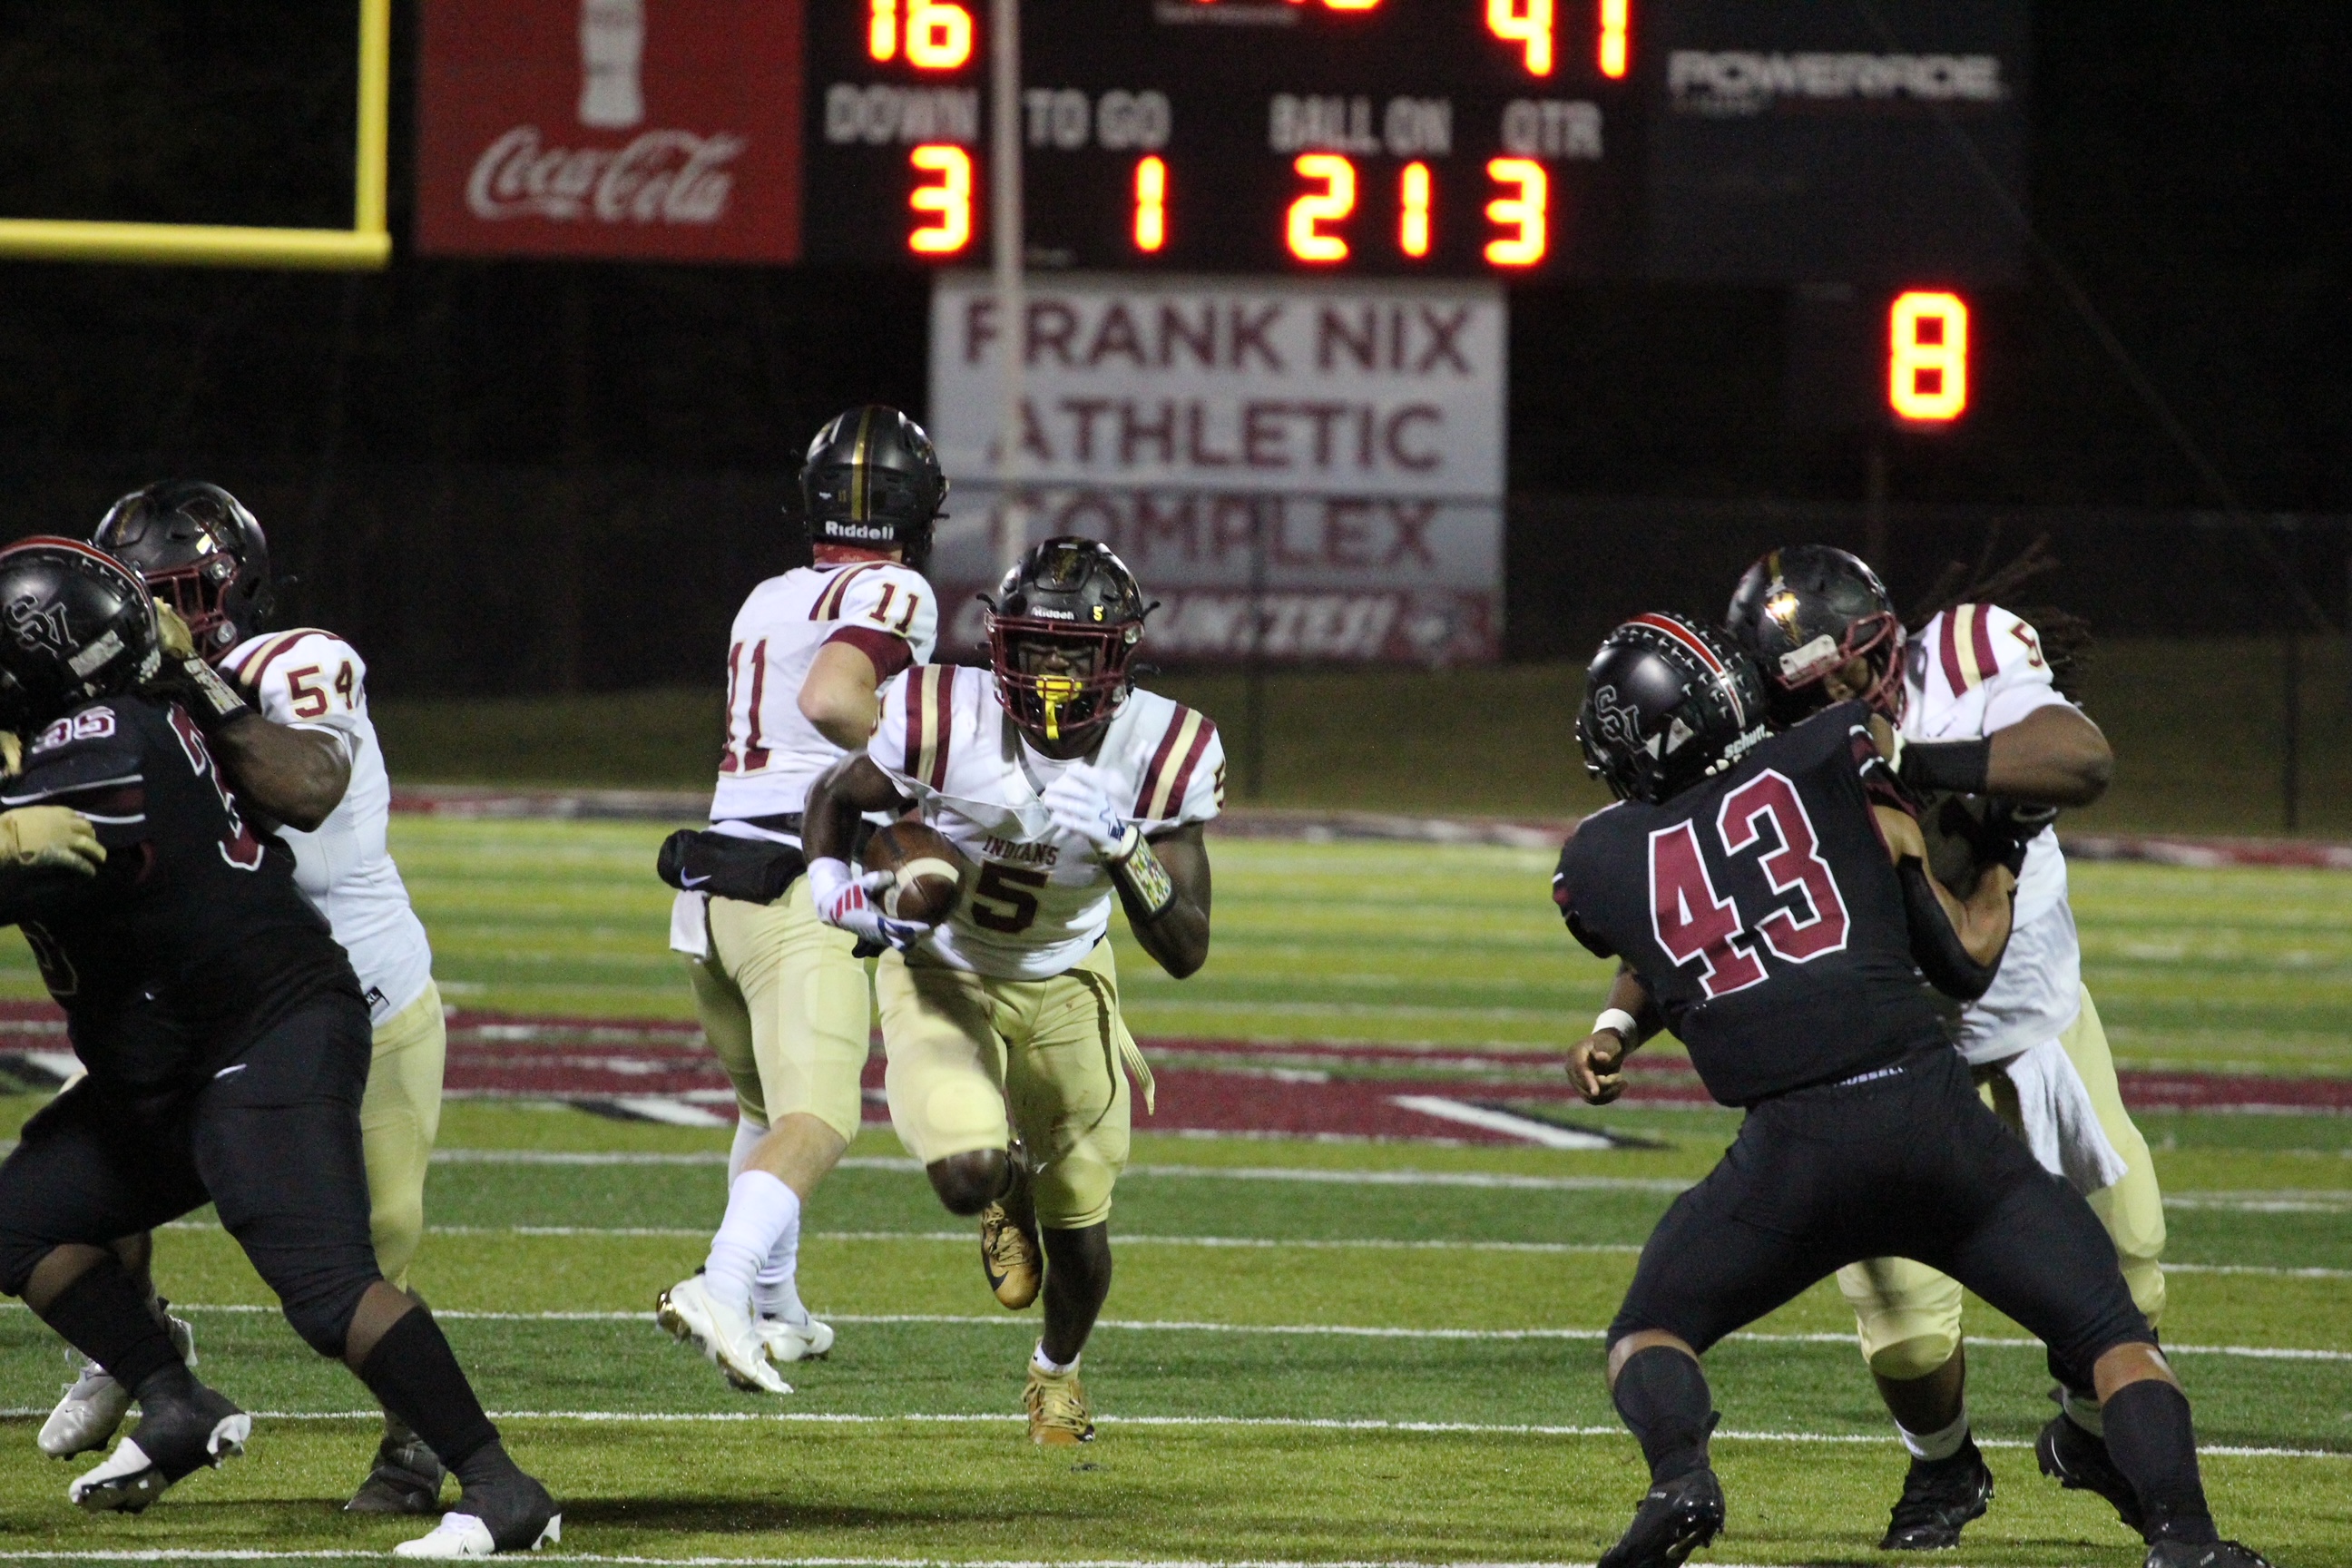 Pinson Valley marches into Round 3